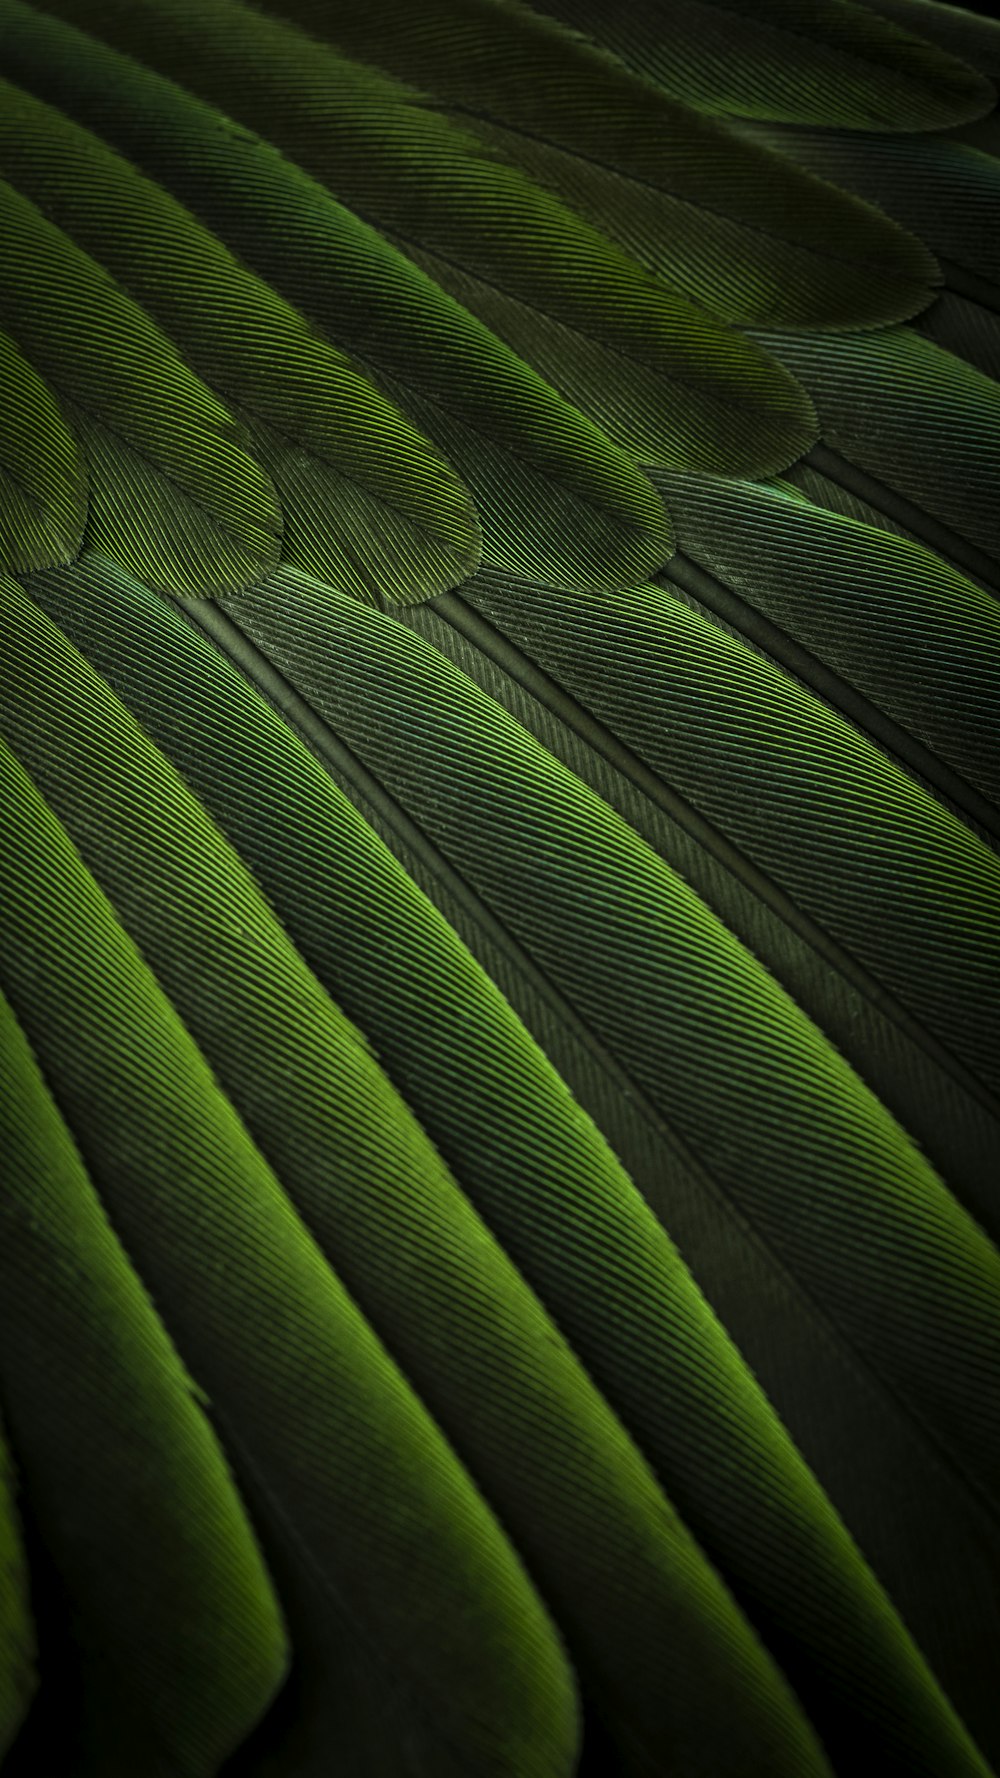 Green Fabric Pictures | Download Free Images on Unsplash